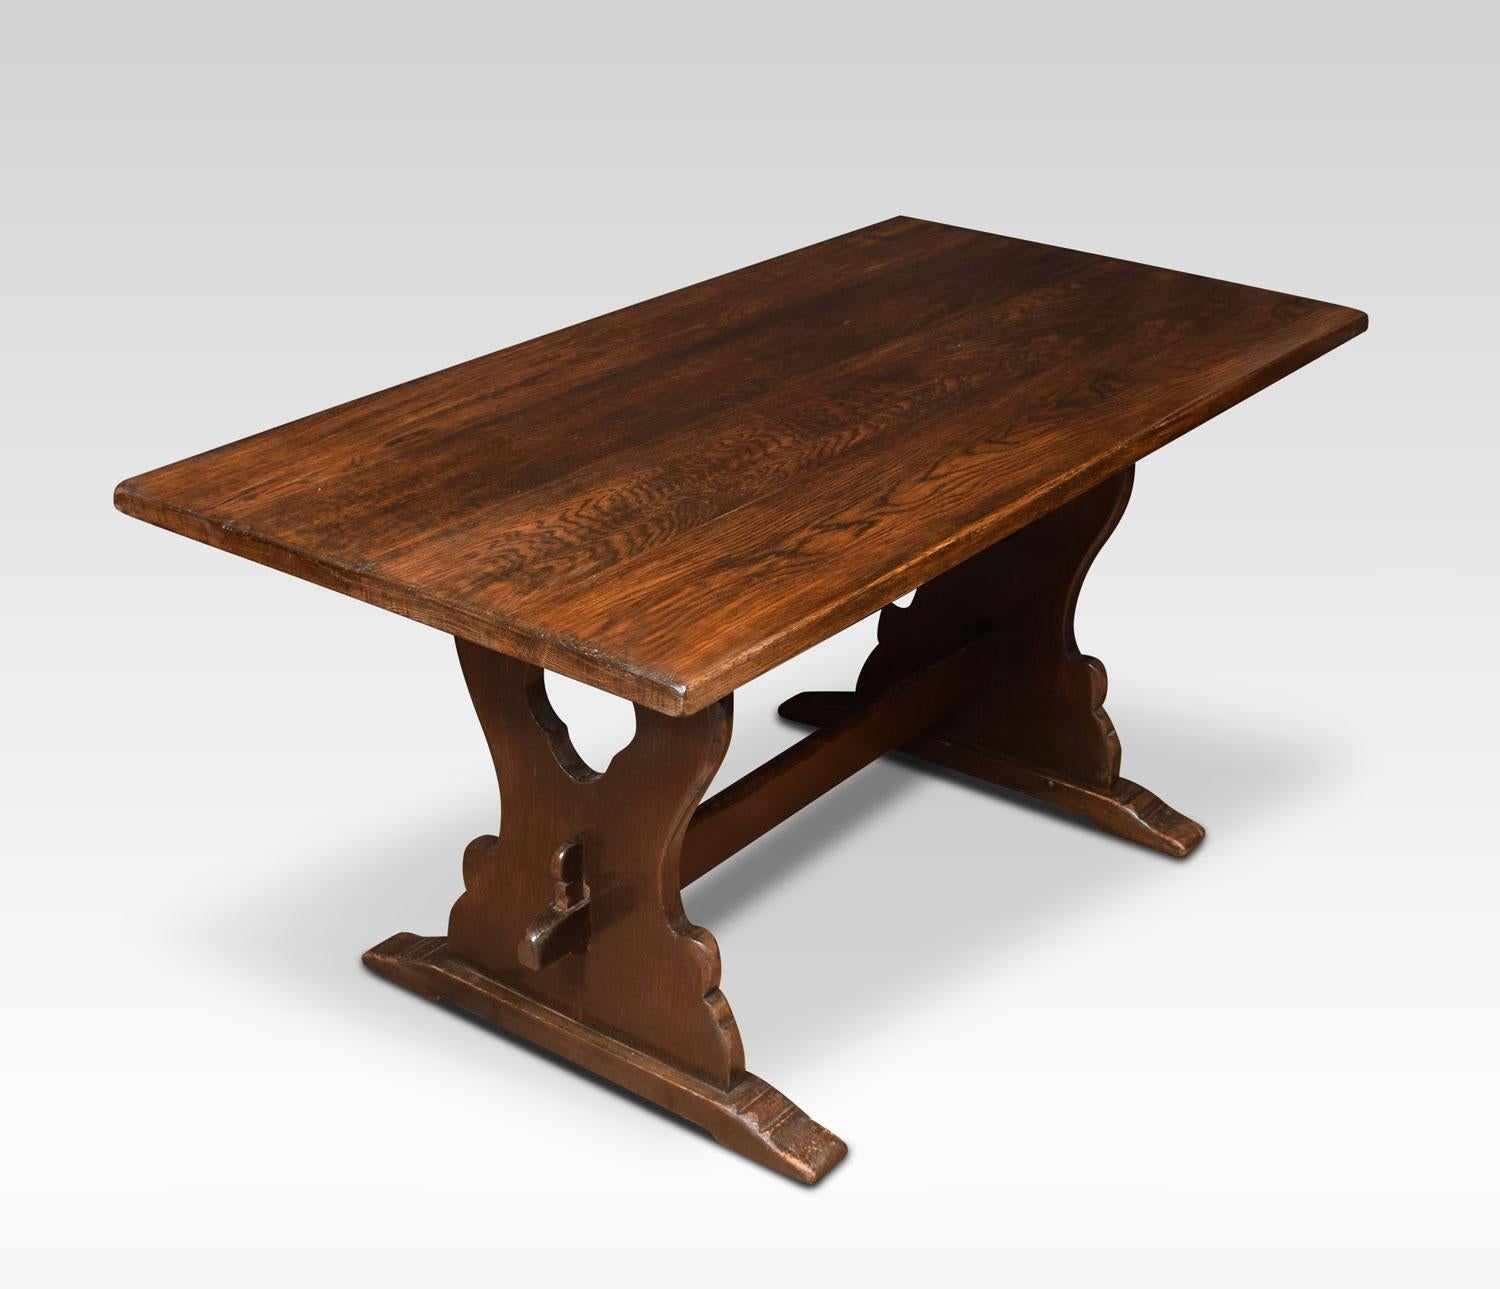 Oak refectory table, the plank top with rounded corners, raised on arched supports with trestle legs.
Dimensions:
Height 27.5 inches
Width 60 inches
Depth 30.5 inches.